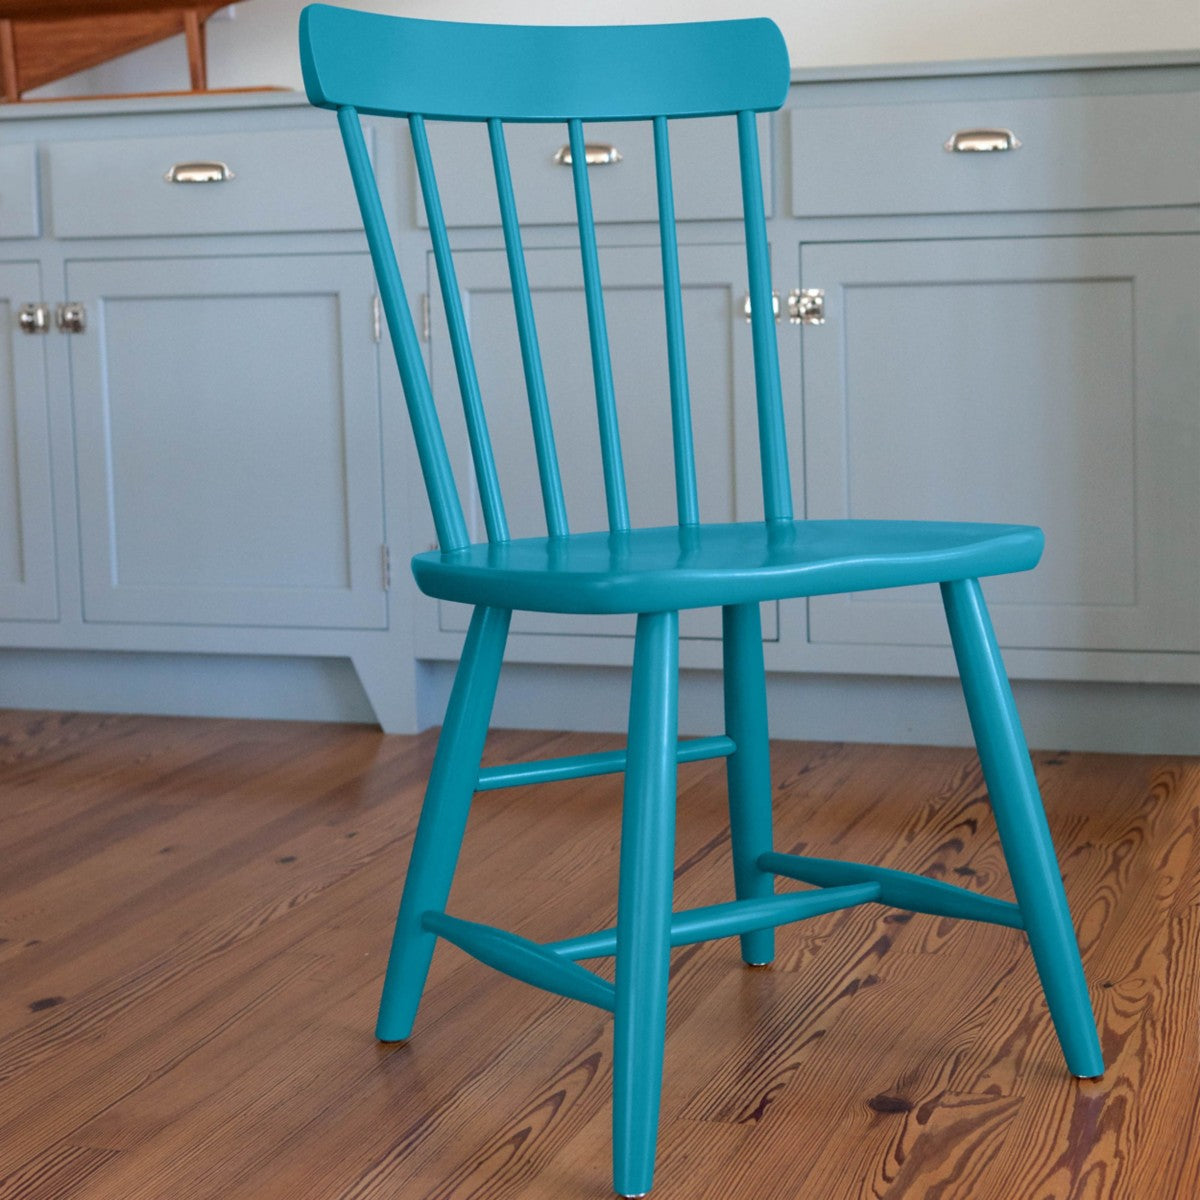 Maine Cottage Wood Side Chair Small Dining Chair | Maine Cottage 